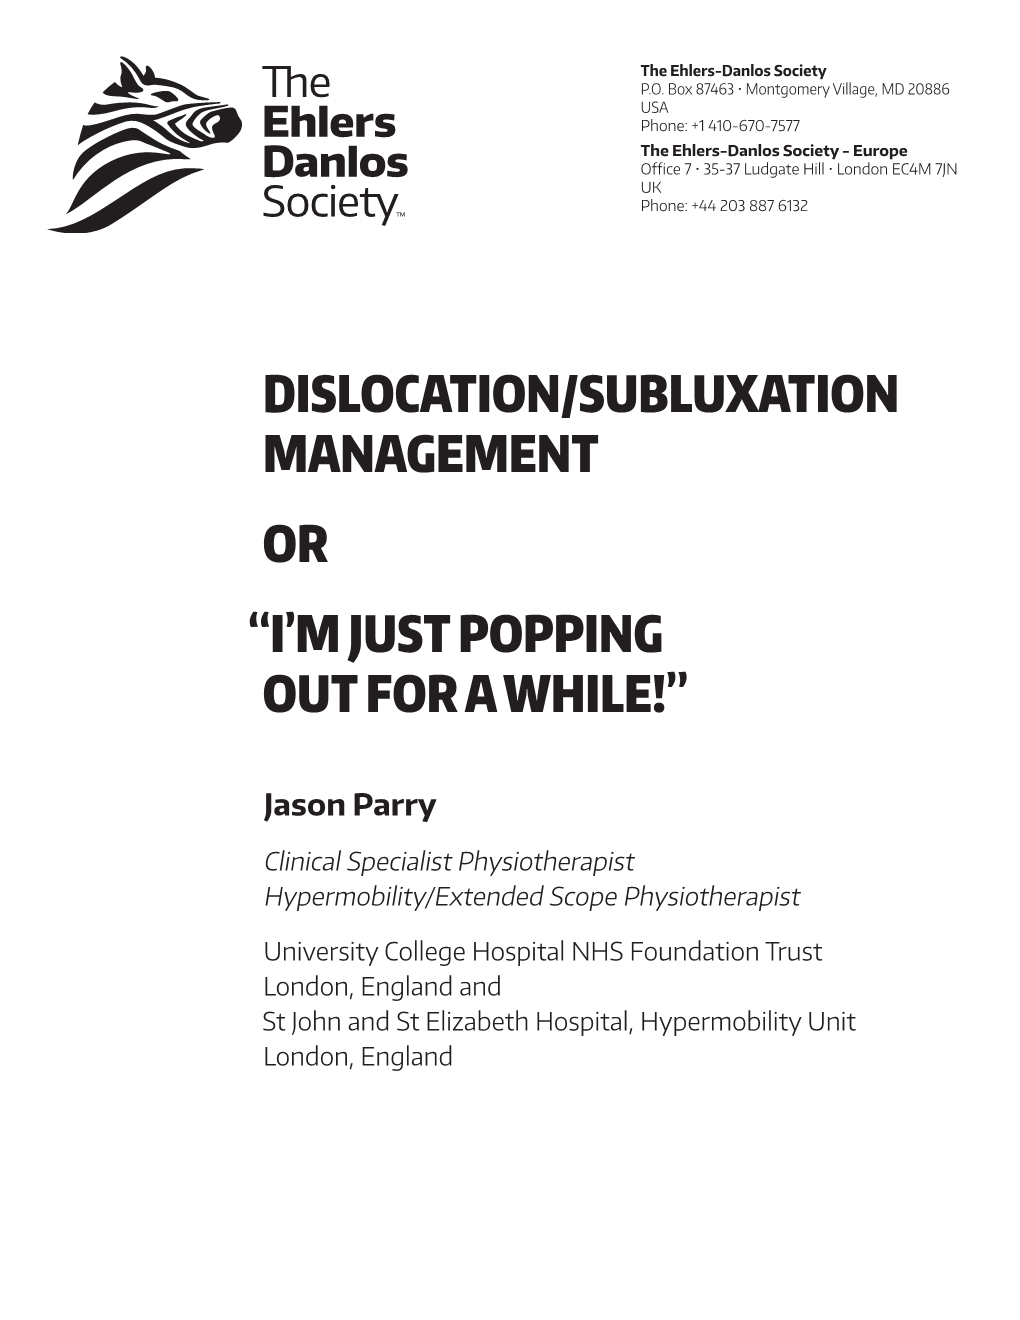 Dislocation/Subluxation Management Or “I’M Just Popping out for a While!”